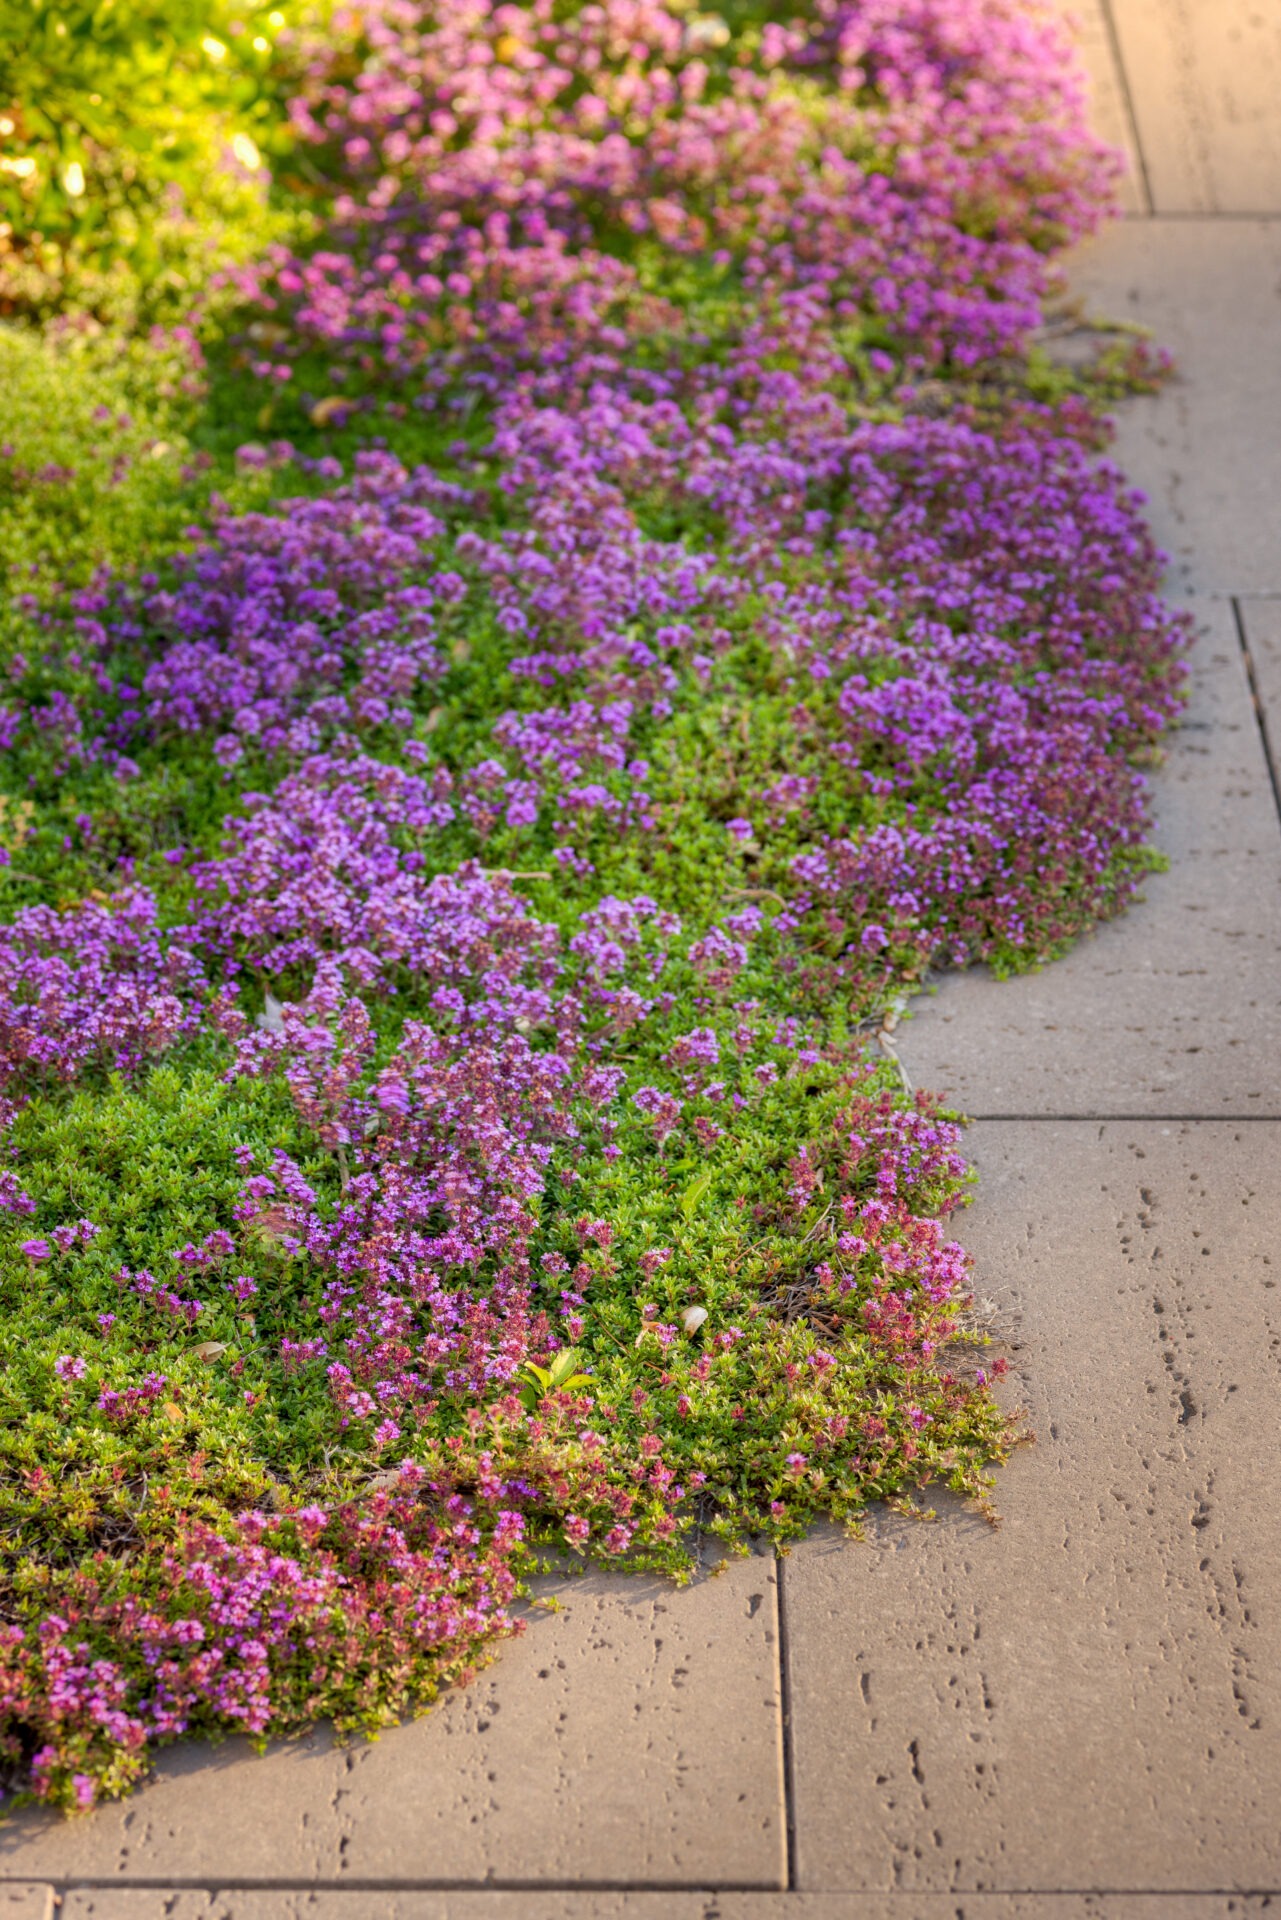 The image features a vibrant bed of lilac flowers spilling onto a concrete path, basking in sunlight with contrasting shades of green foliage.